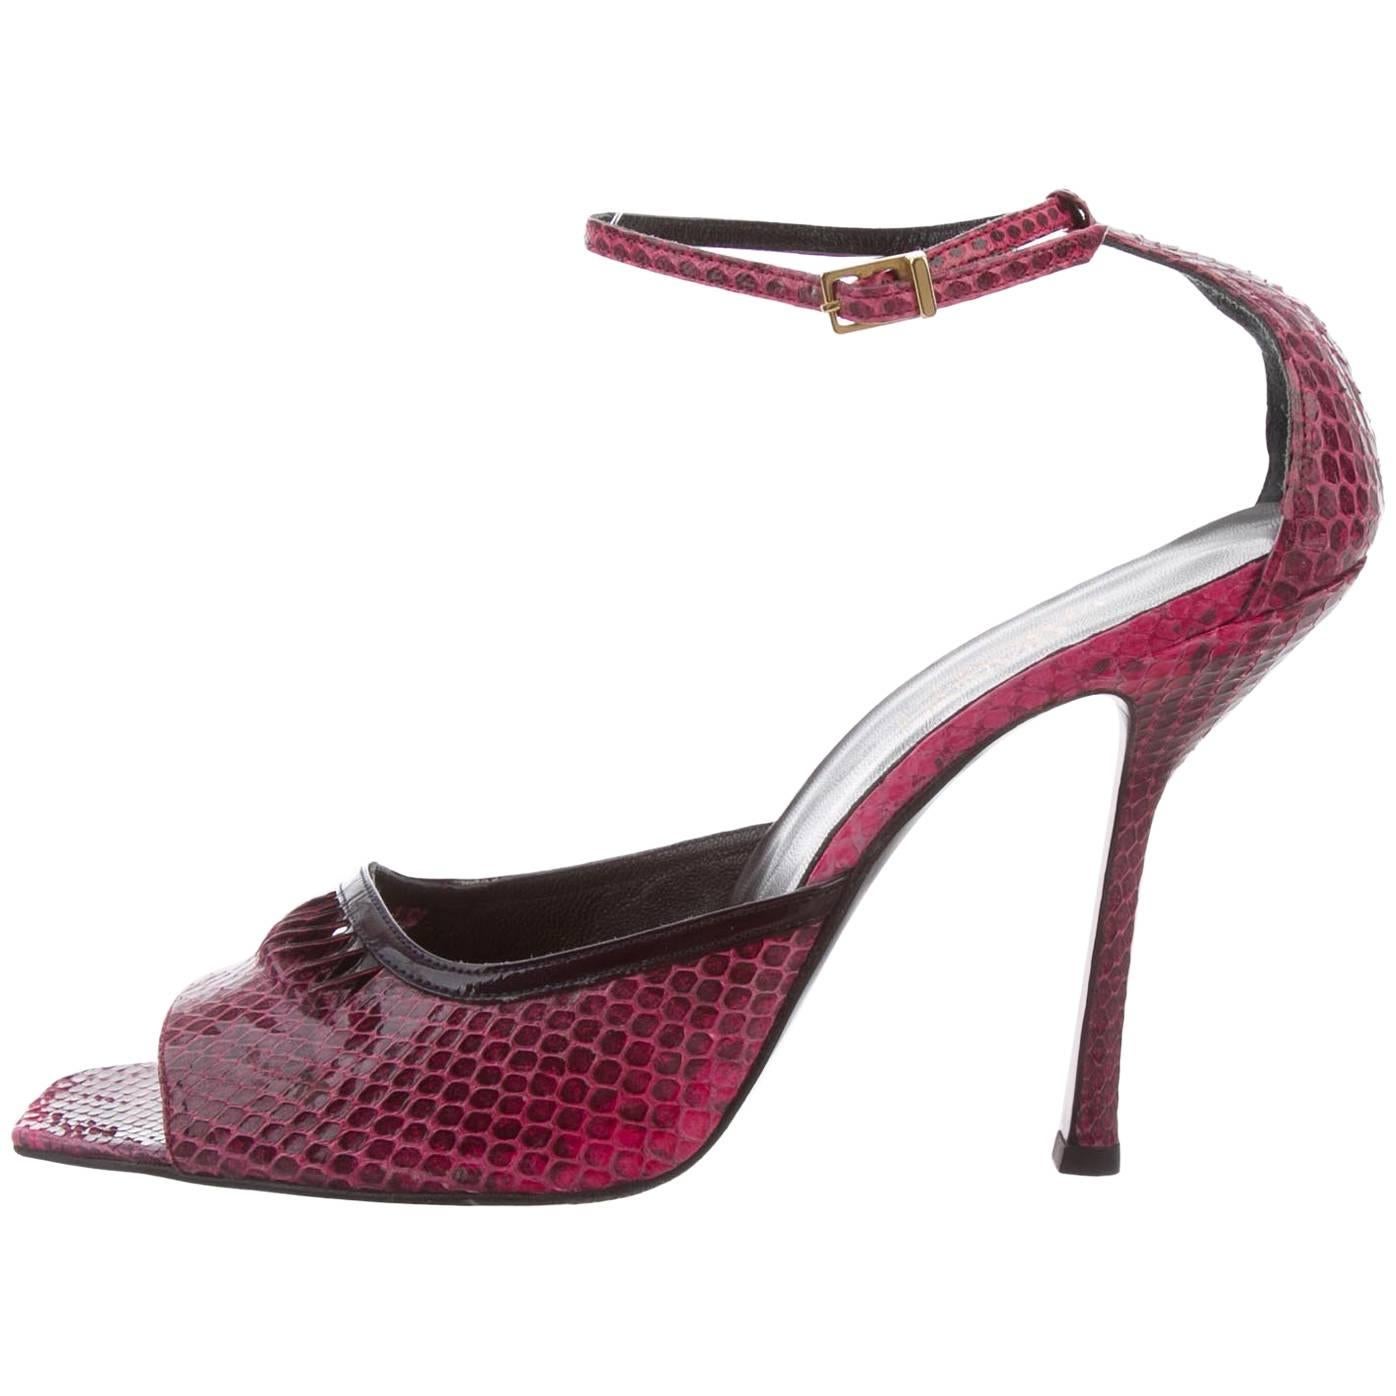 New Gianni Versace F/W 2000 Raspberry Snakeskin Peep-toe Shoes Sandals 39.5  9.5 For Sale